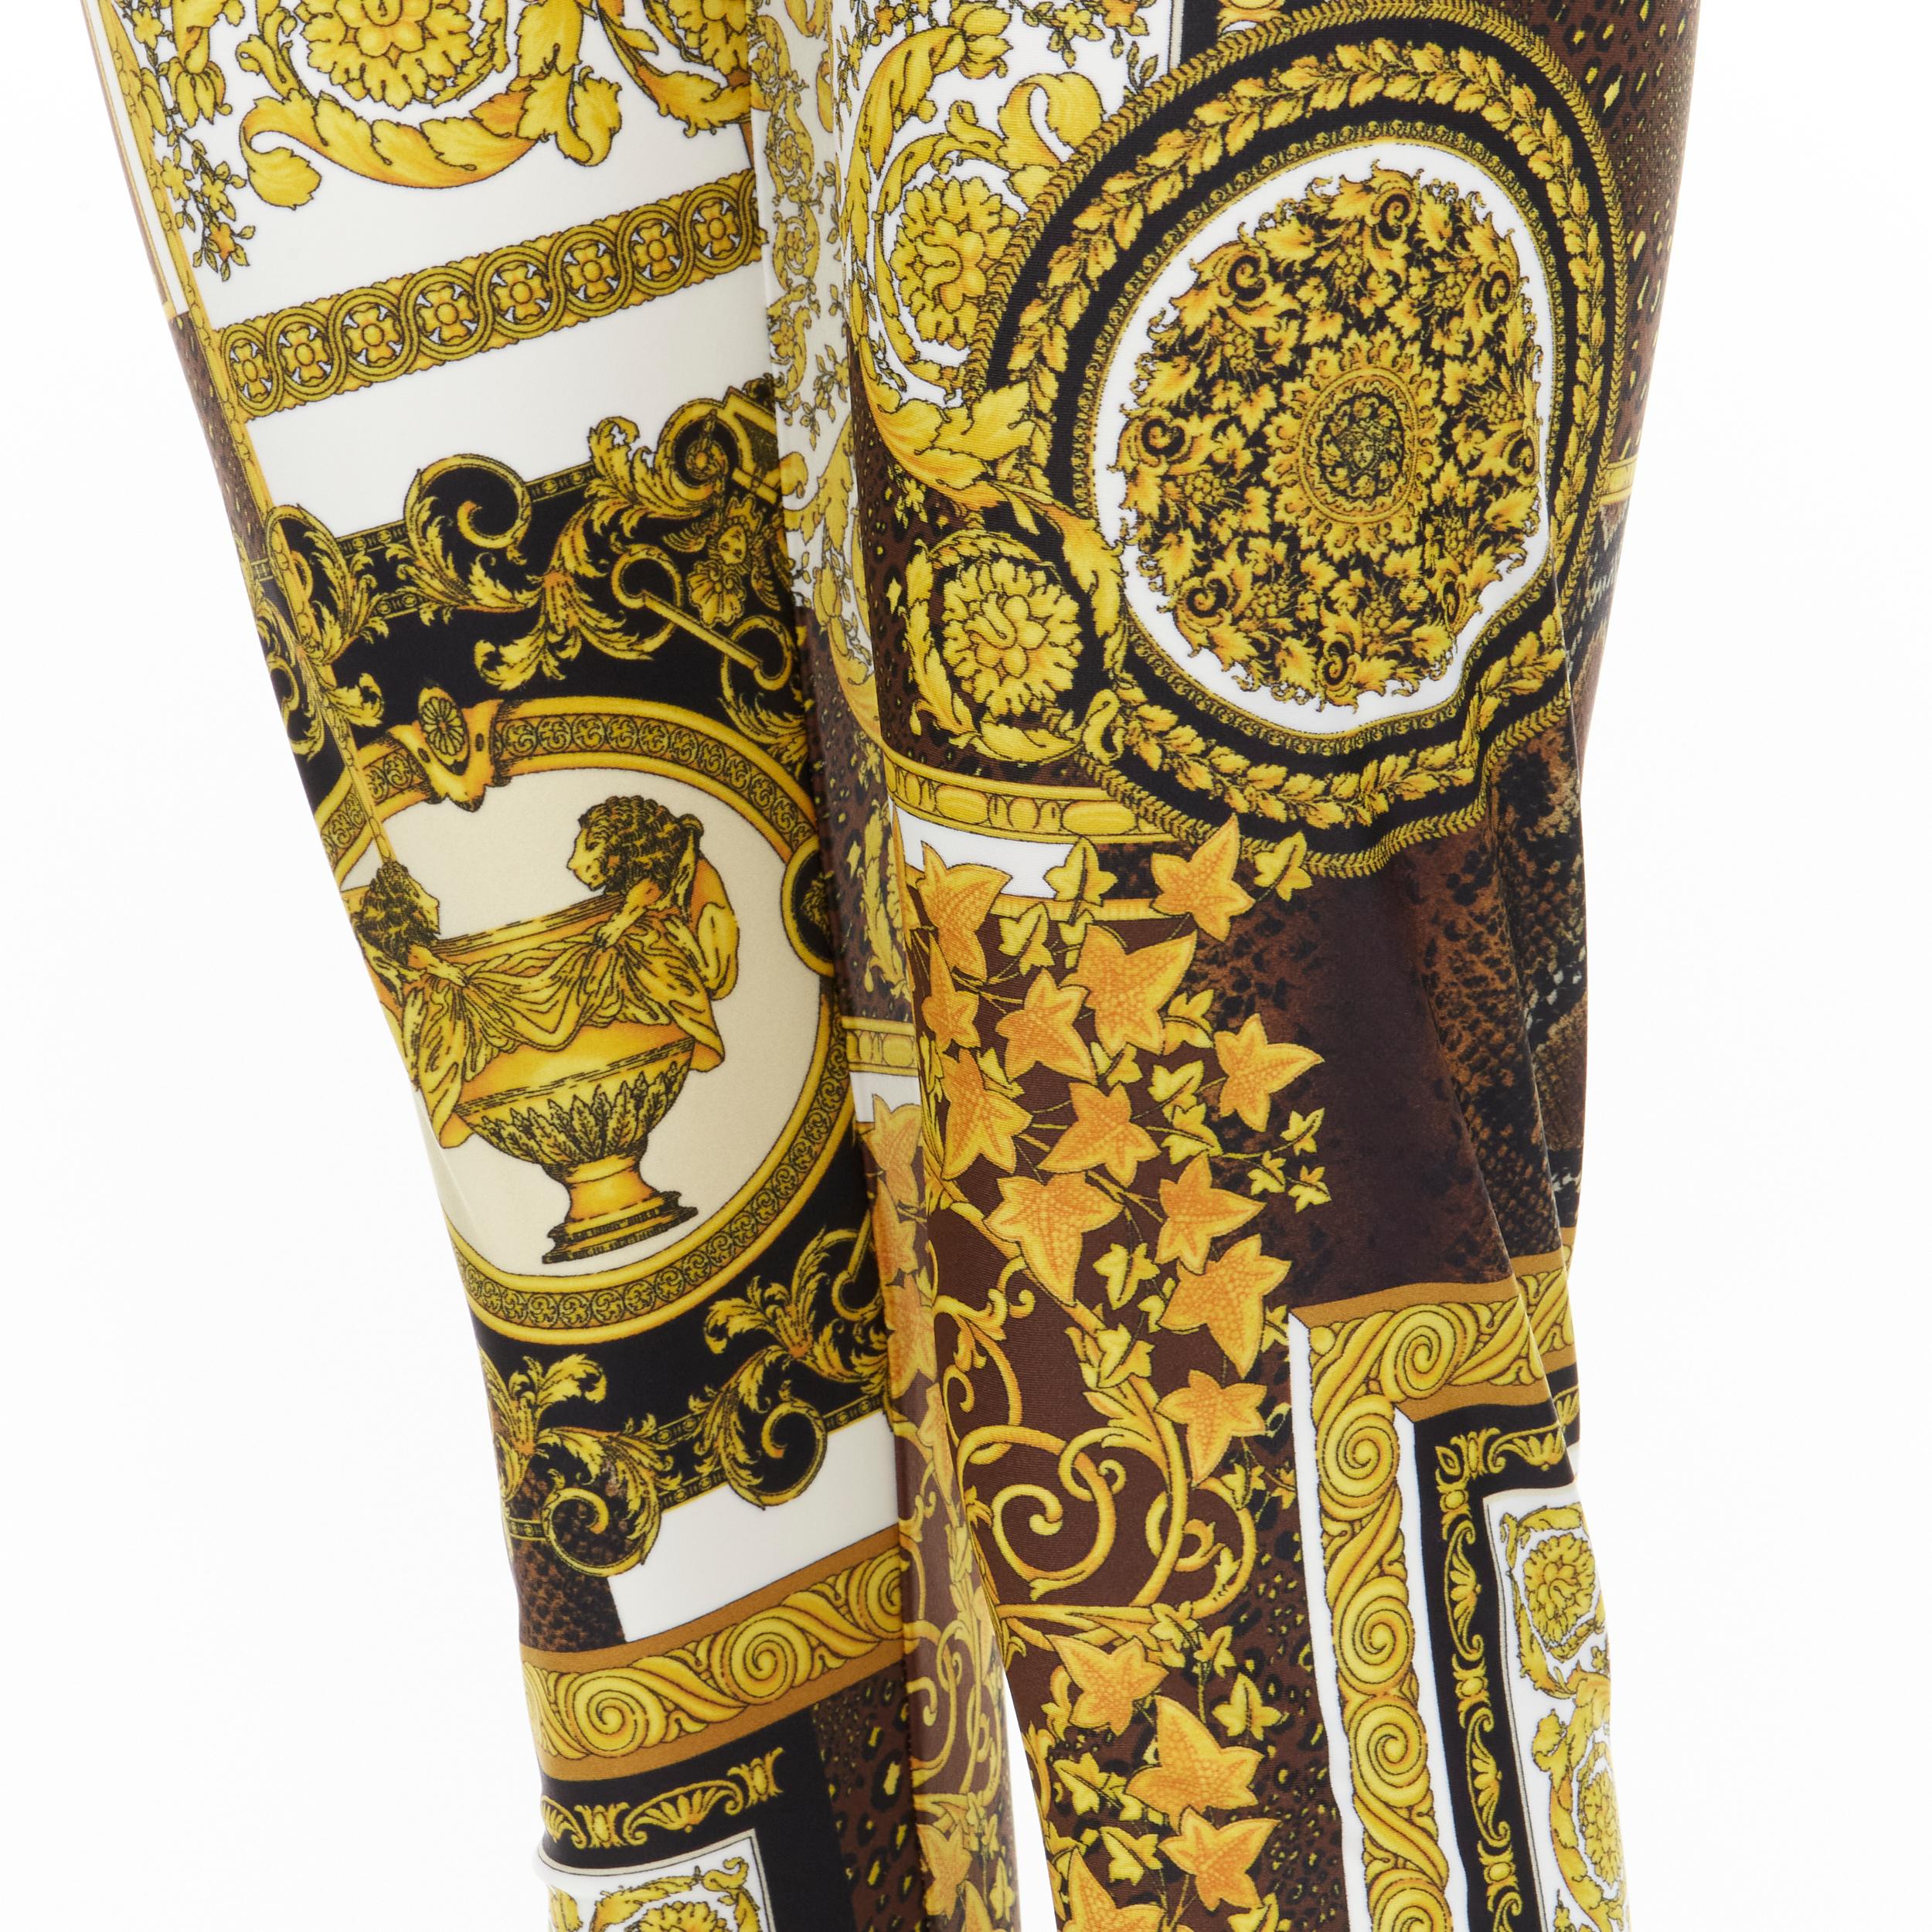 new VERSACE 2021 Mosaic Barocco brown gold print stretchy legging pant IT44 L 
Reference: TGAS/C00605 
Brand: Versace 
Designer: Donatella Versace 
Collection: Resort 2021 
Material: Polyamide 
Color: Gold 
Pattern: Snakeskin 
Extra Detail: Stretch